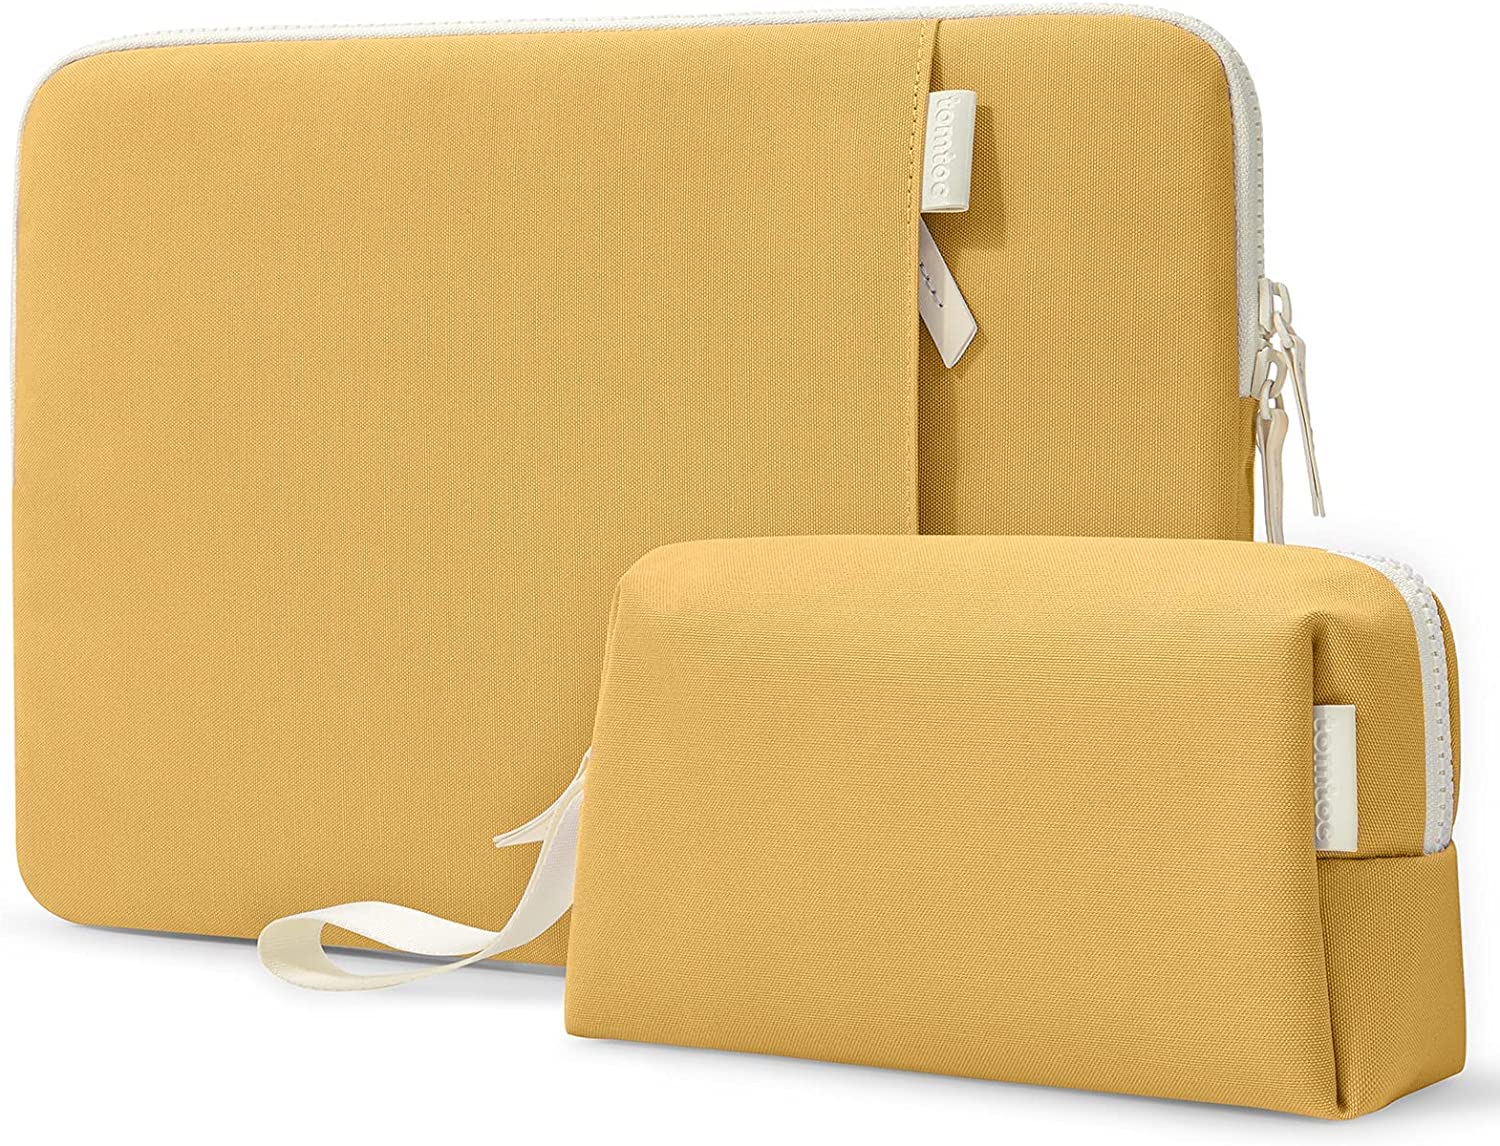 Tomtoc TheHer-A23 Jelly Laptop Sleeve Kit 14 inch - Yellow